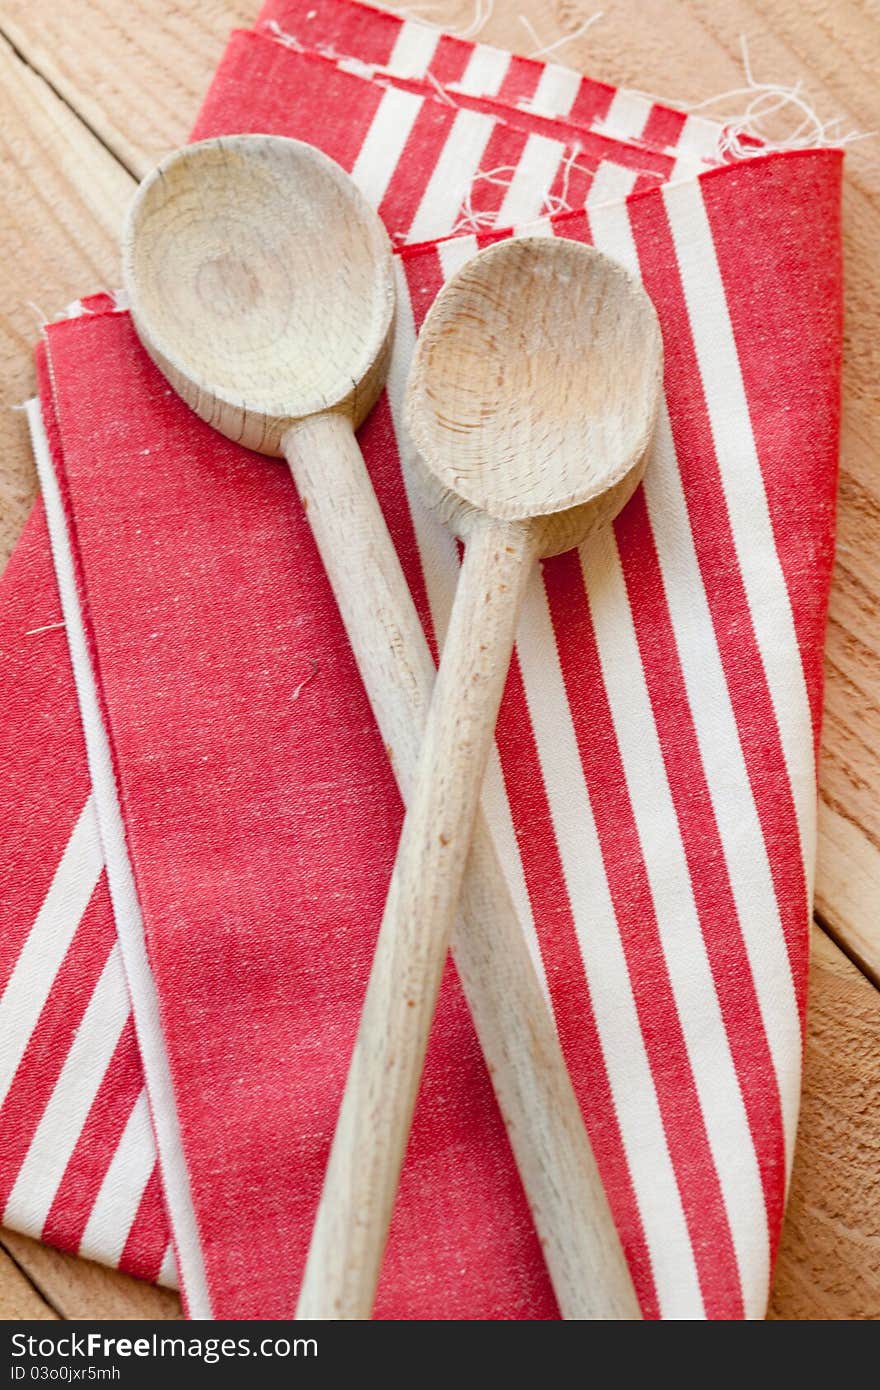 Two wooden spoons rest on a red striped kitchen towel. Two wooden spoons rest on a red striped kitchen towel.